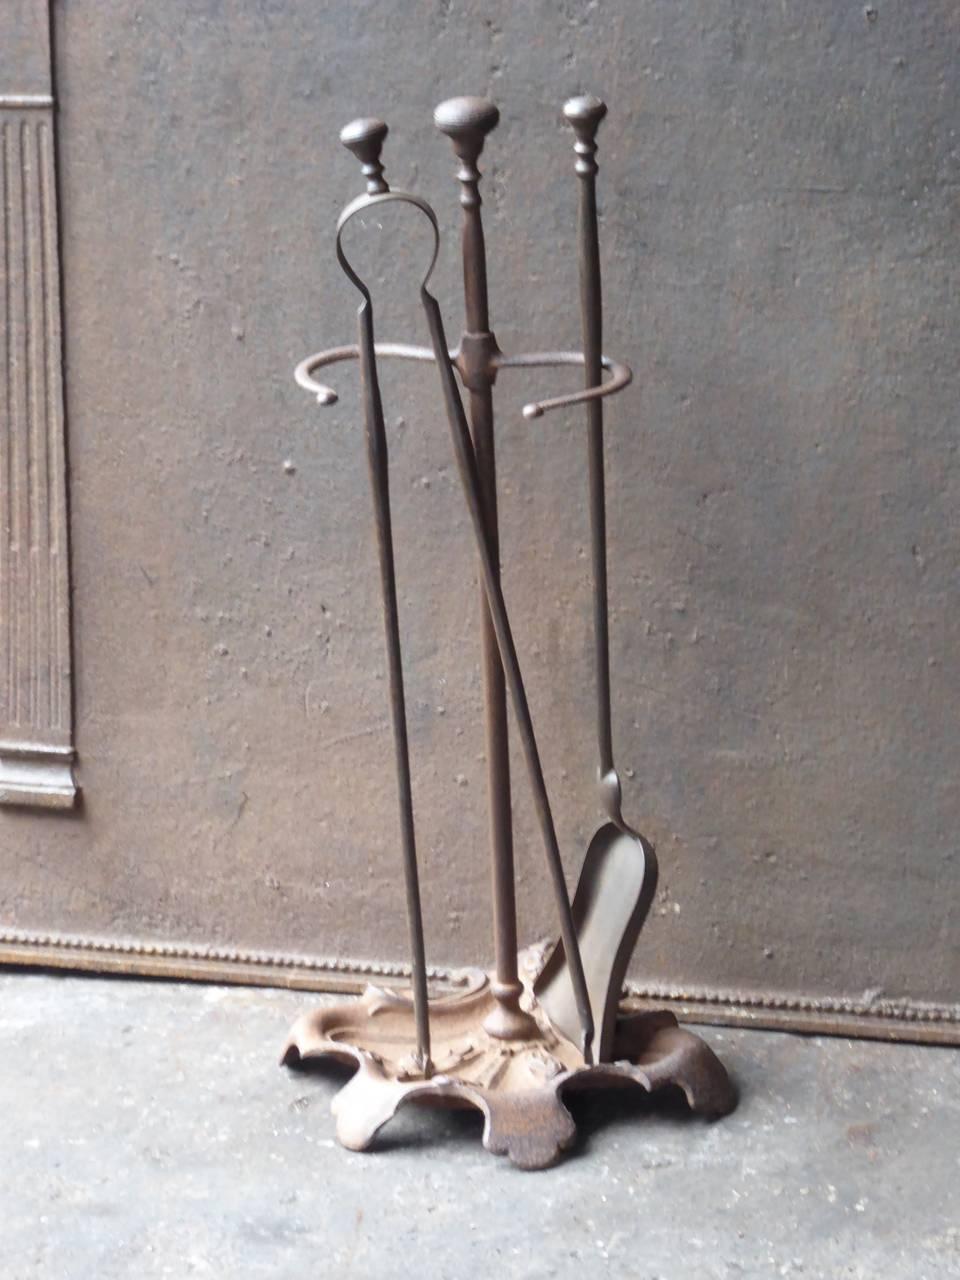 19th century French fire tools, fire irons made of wrought iron and cast iron.

We have a unique and specialized collection of antique and used fireplace accessories consisting of more than 1000 listings at 1stdibs. Amongst others, we always have